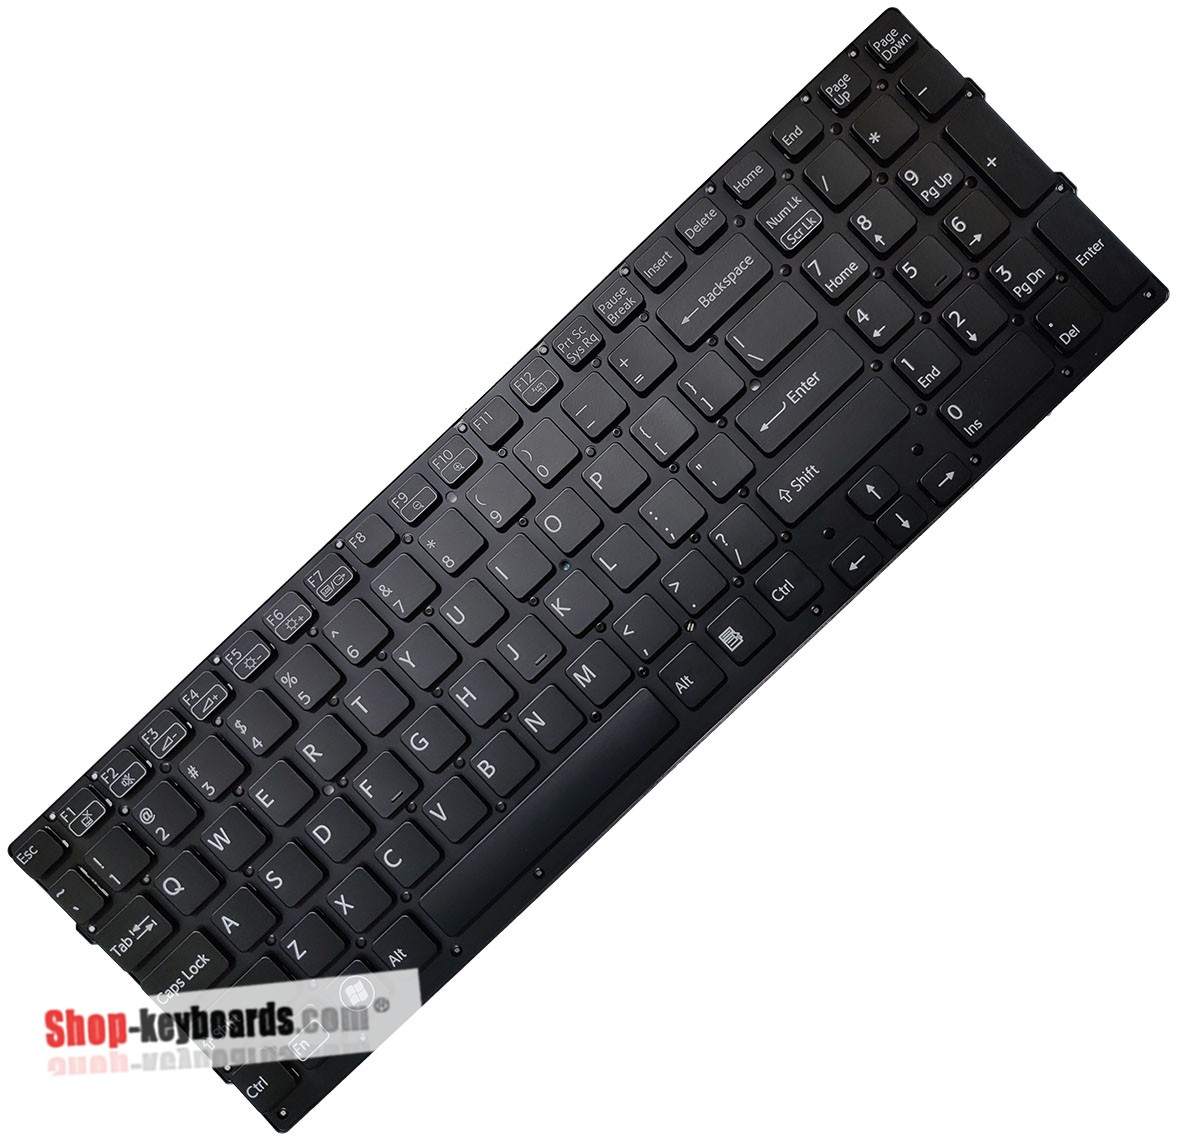 Sony VAIO VPC-F22M0E Keyboard replacement